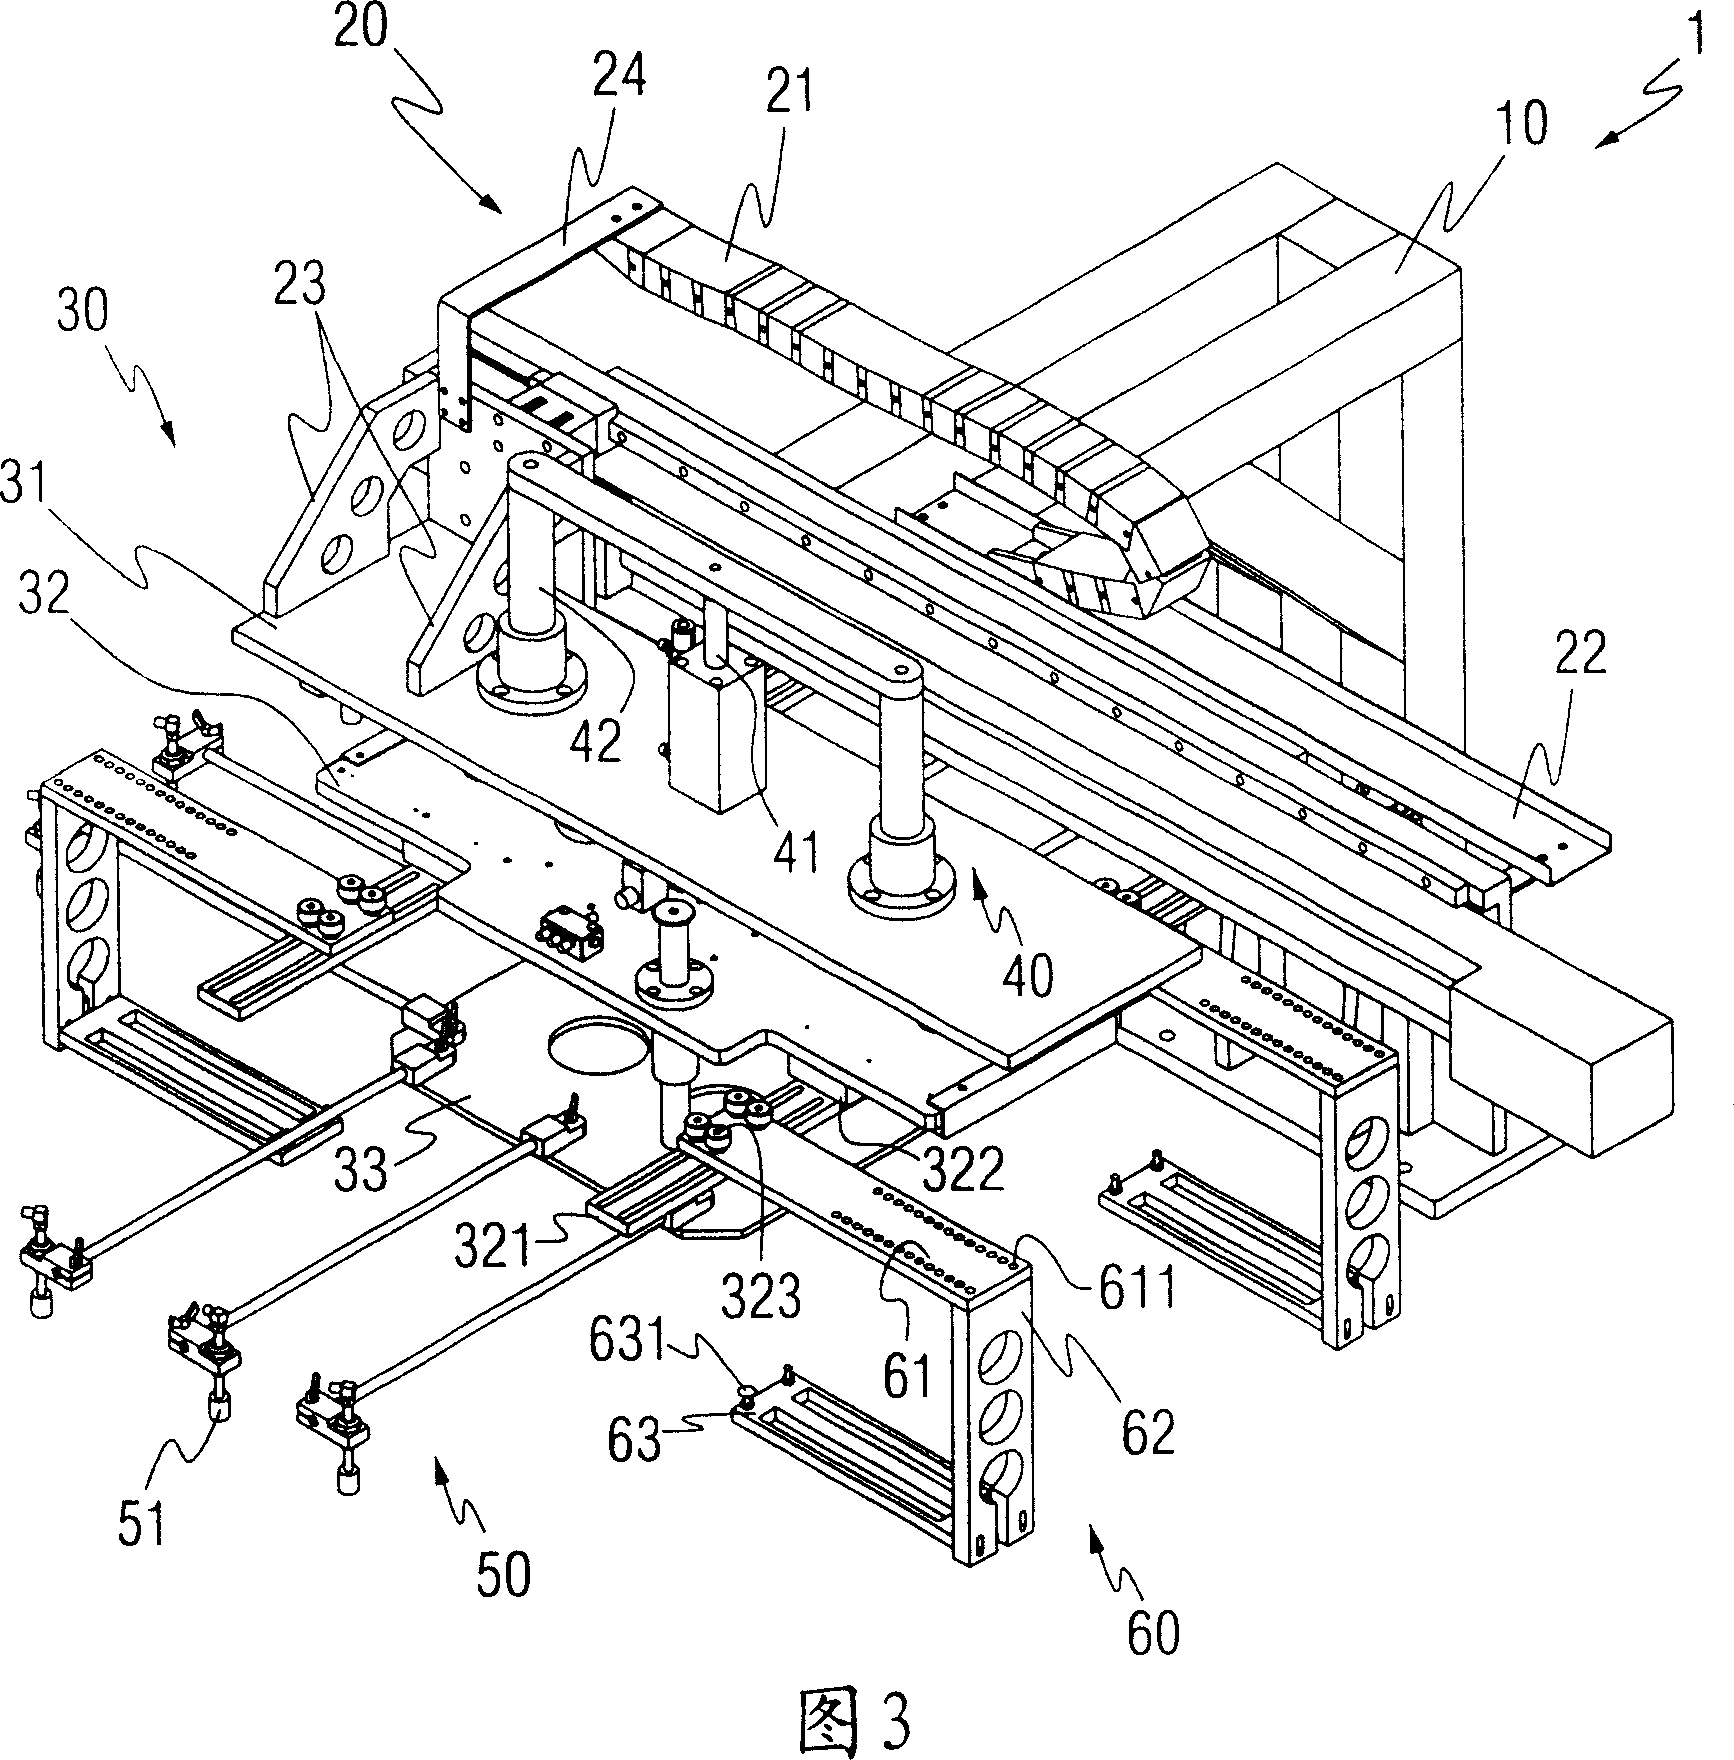 Front panel migrating apparatus